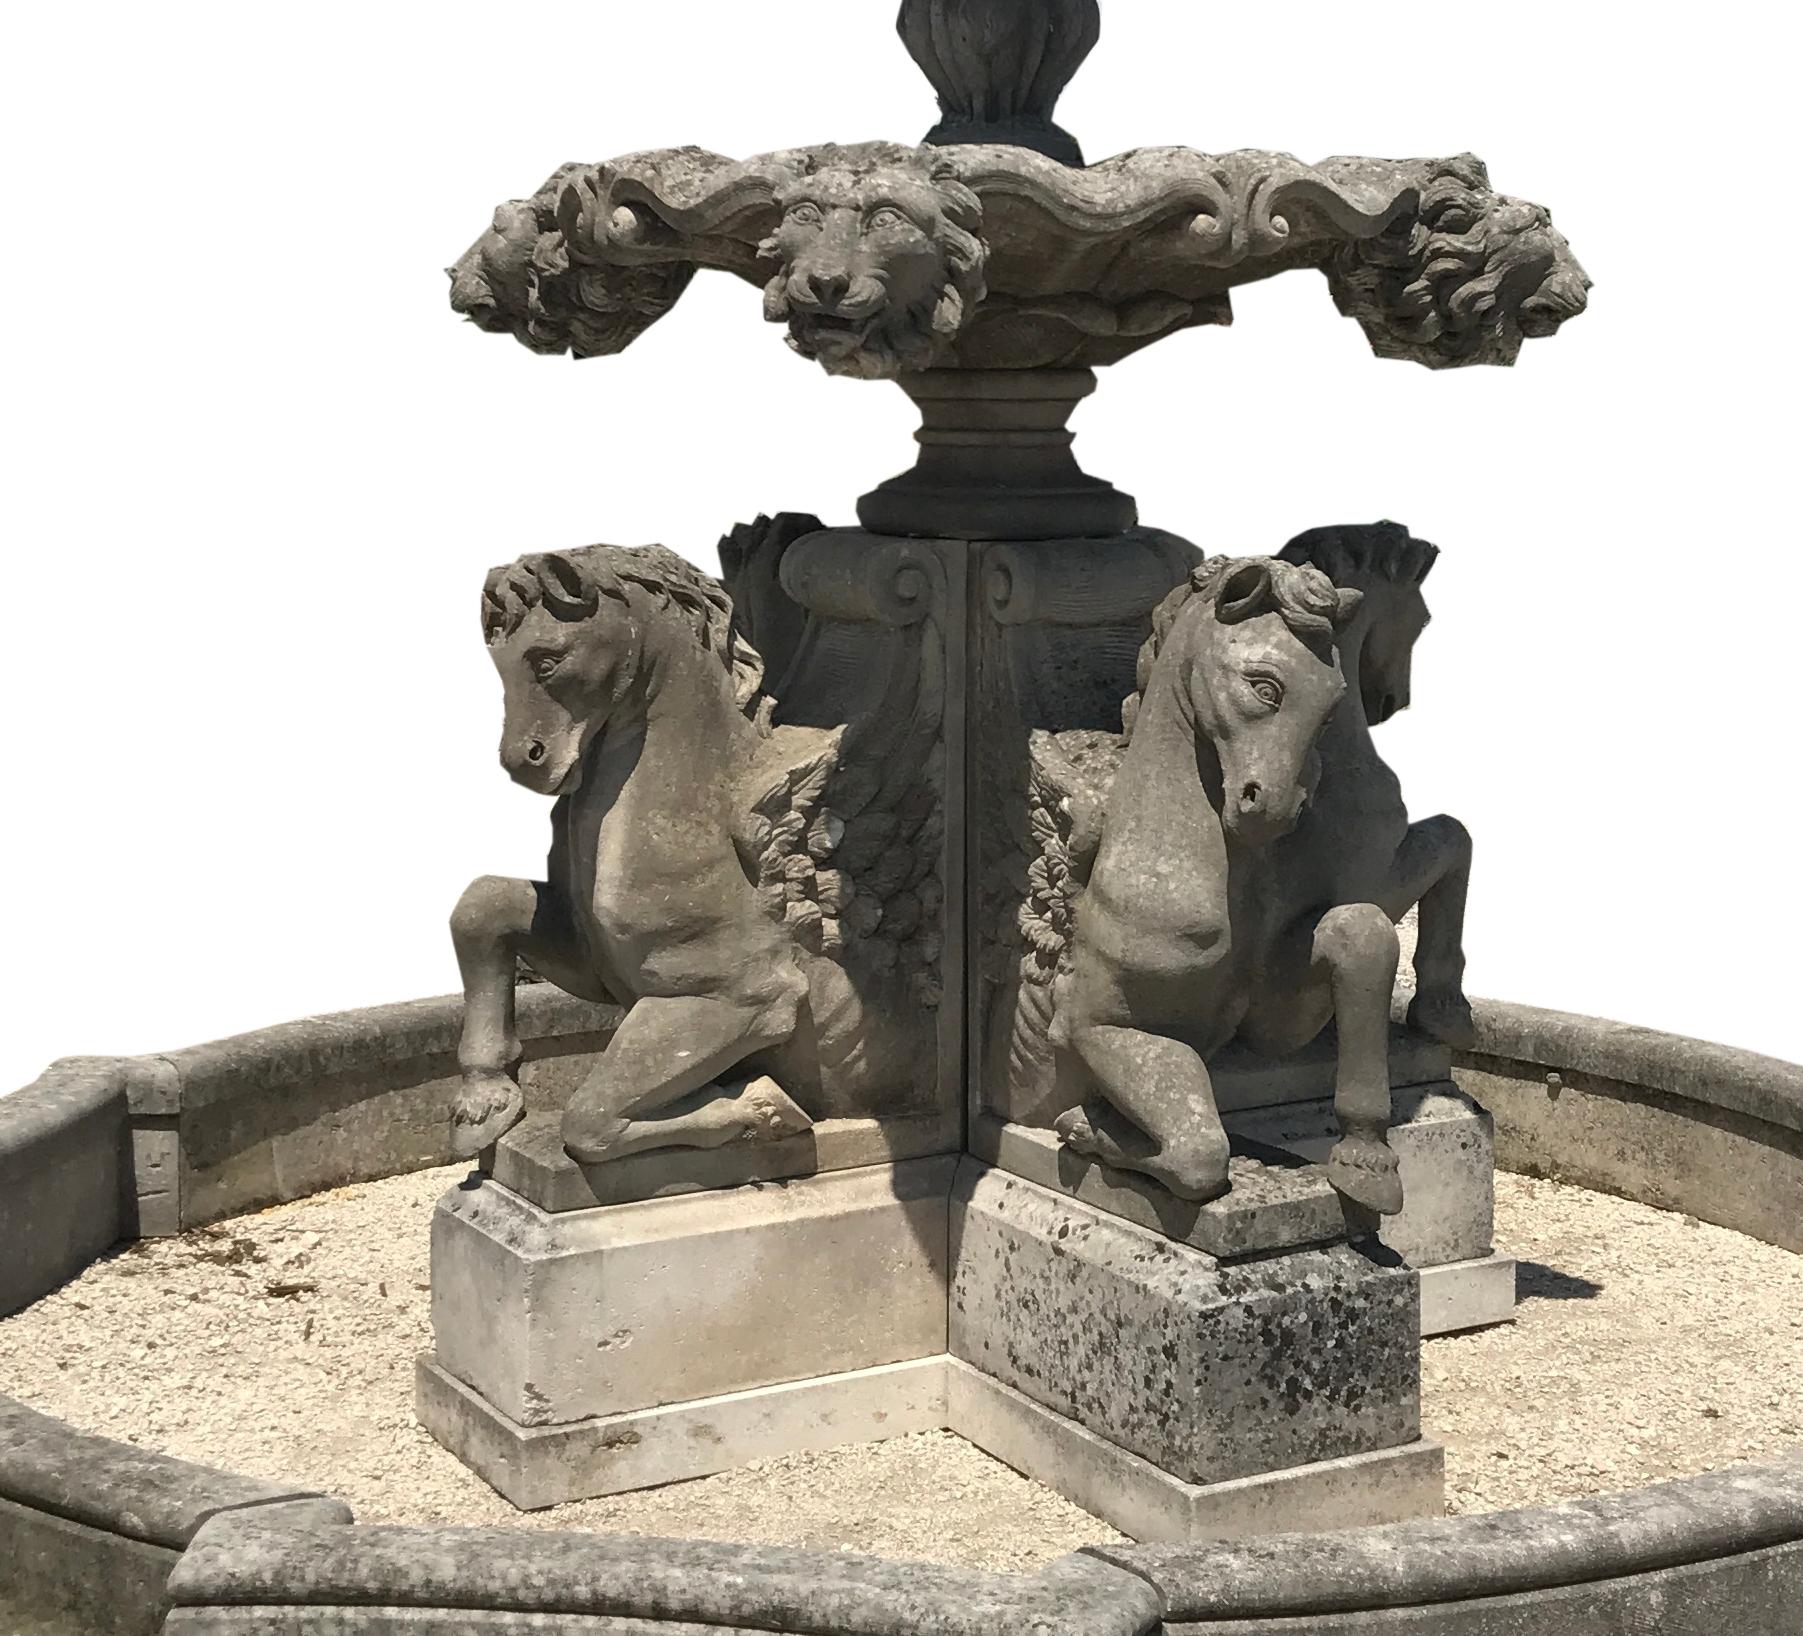 how did fountains work in the 1700s